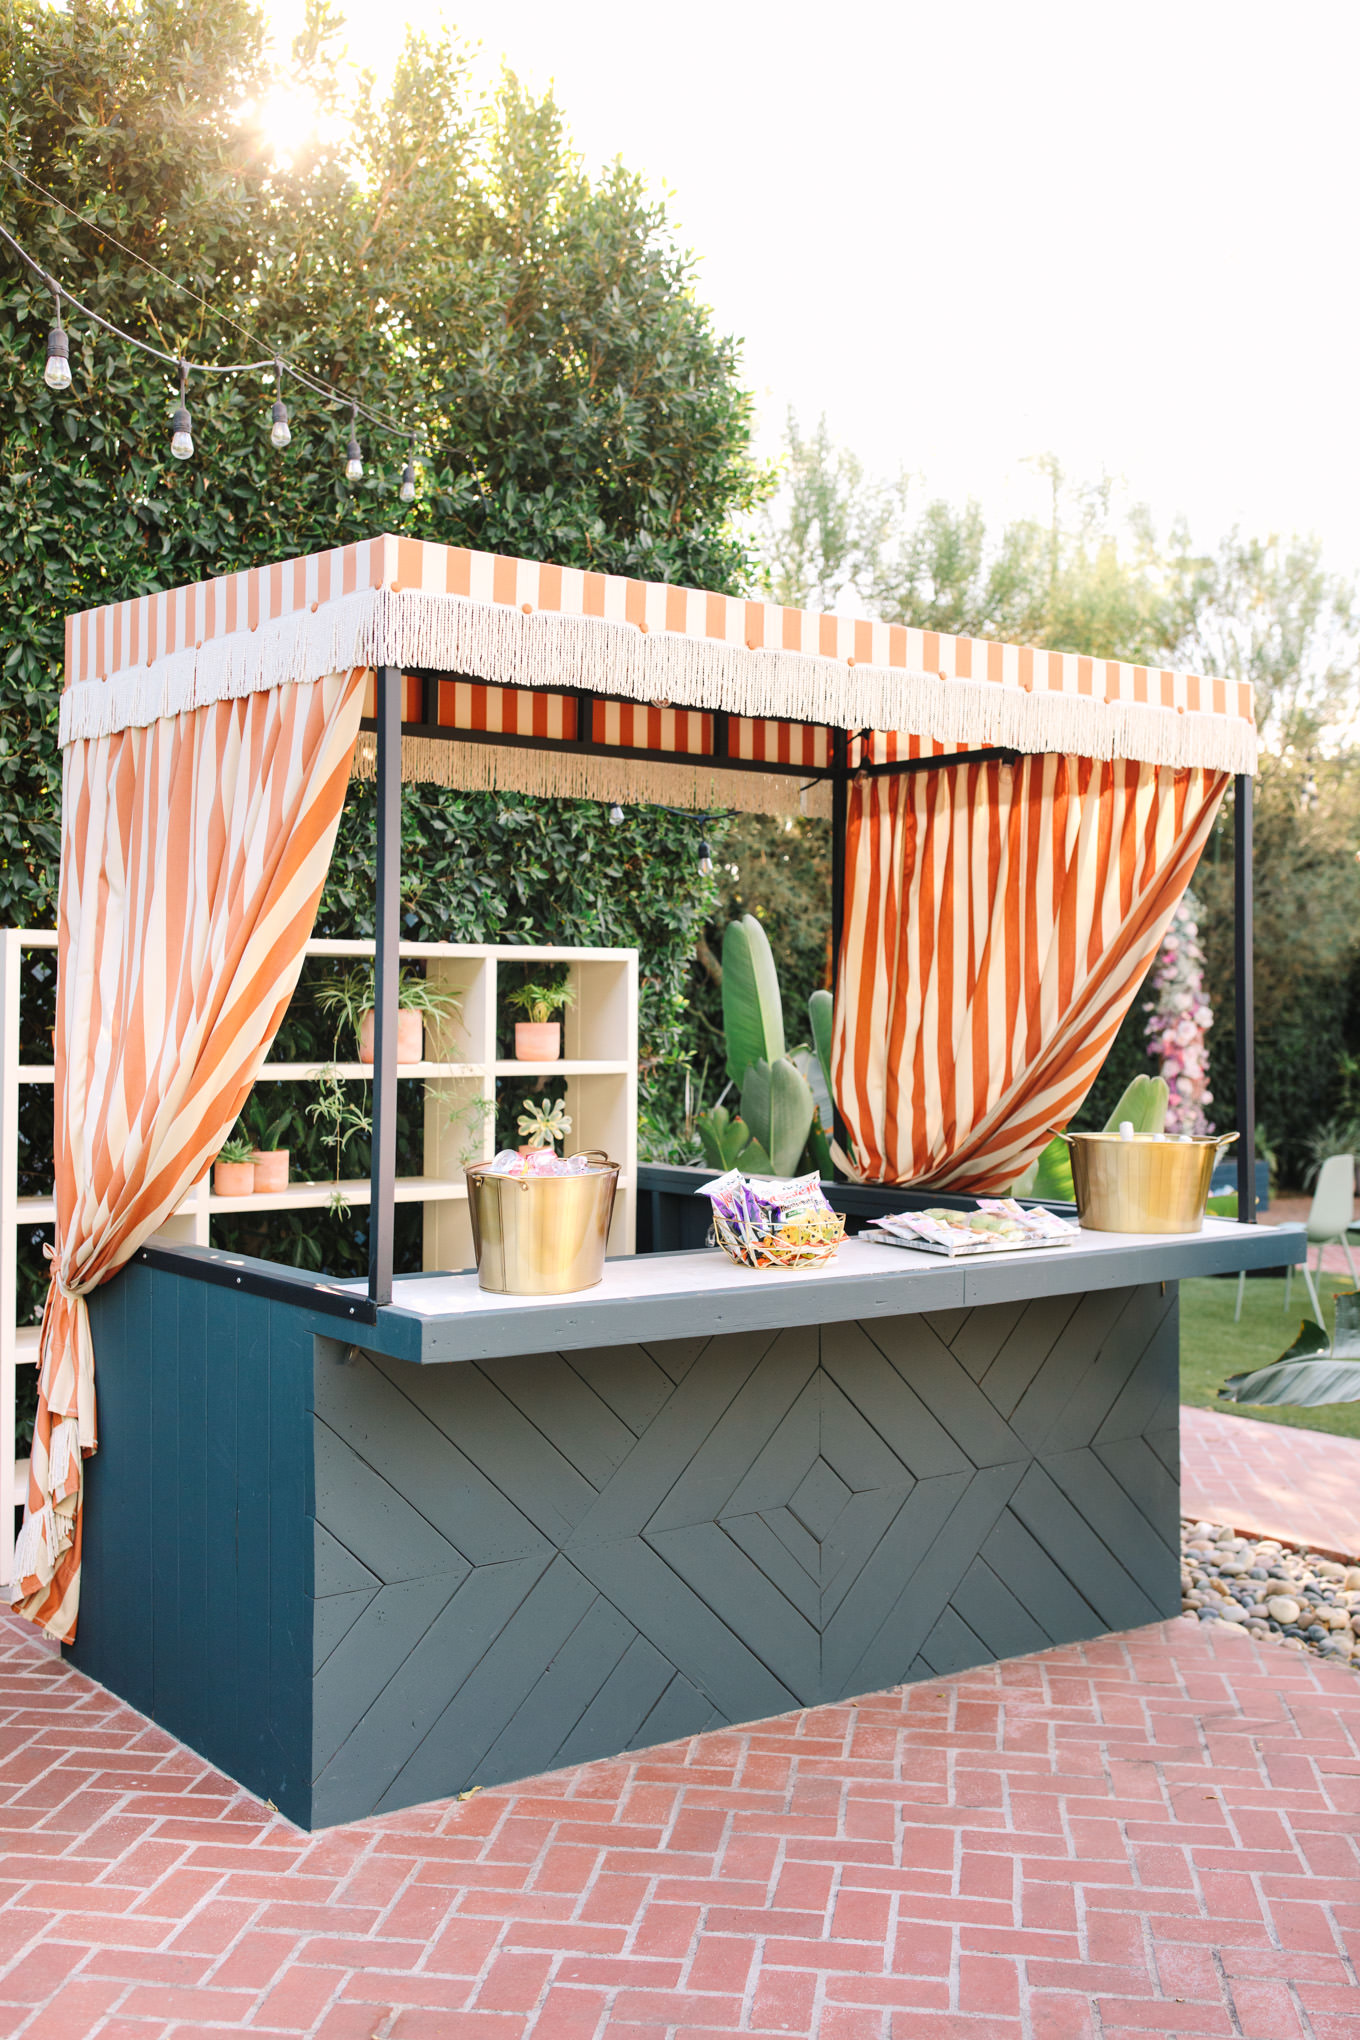 Bar at The Ruby Street | Colorful pop-up micro wedding at The Ruby Street Los Angeles featured on Green Wedding Shoes | Colorful and elevated photography for fun-loving couples in Southern California | #colorfulwedding #popupwedding #weddingphotography #microwedding Source: Mary Costa Photography | Los Angeles